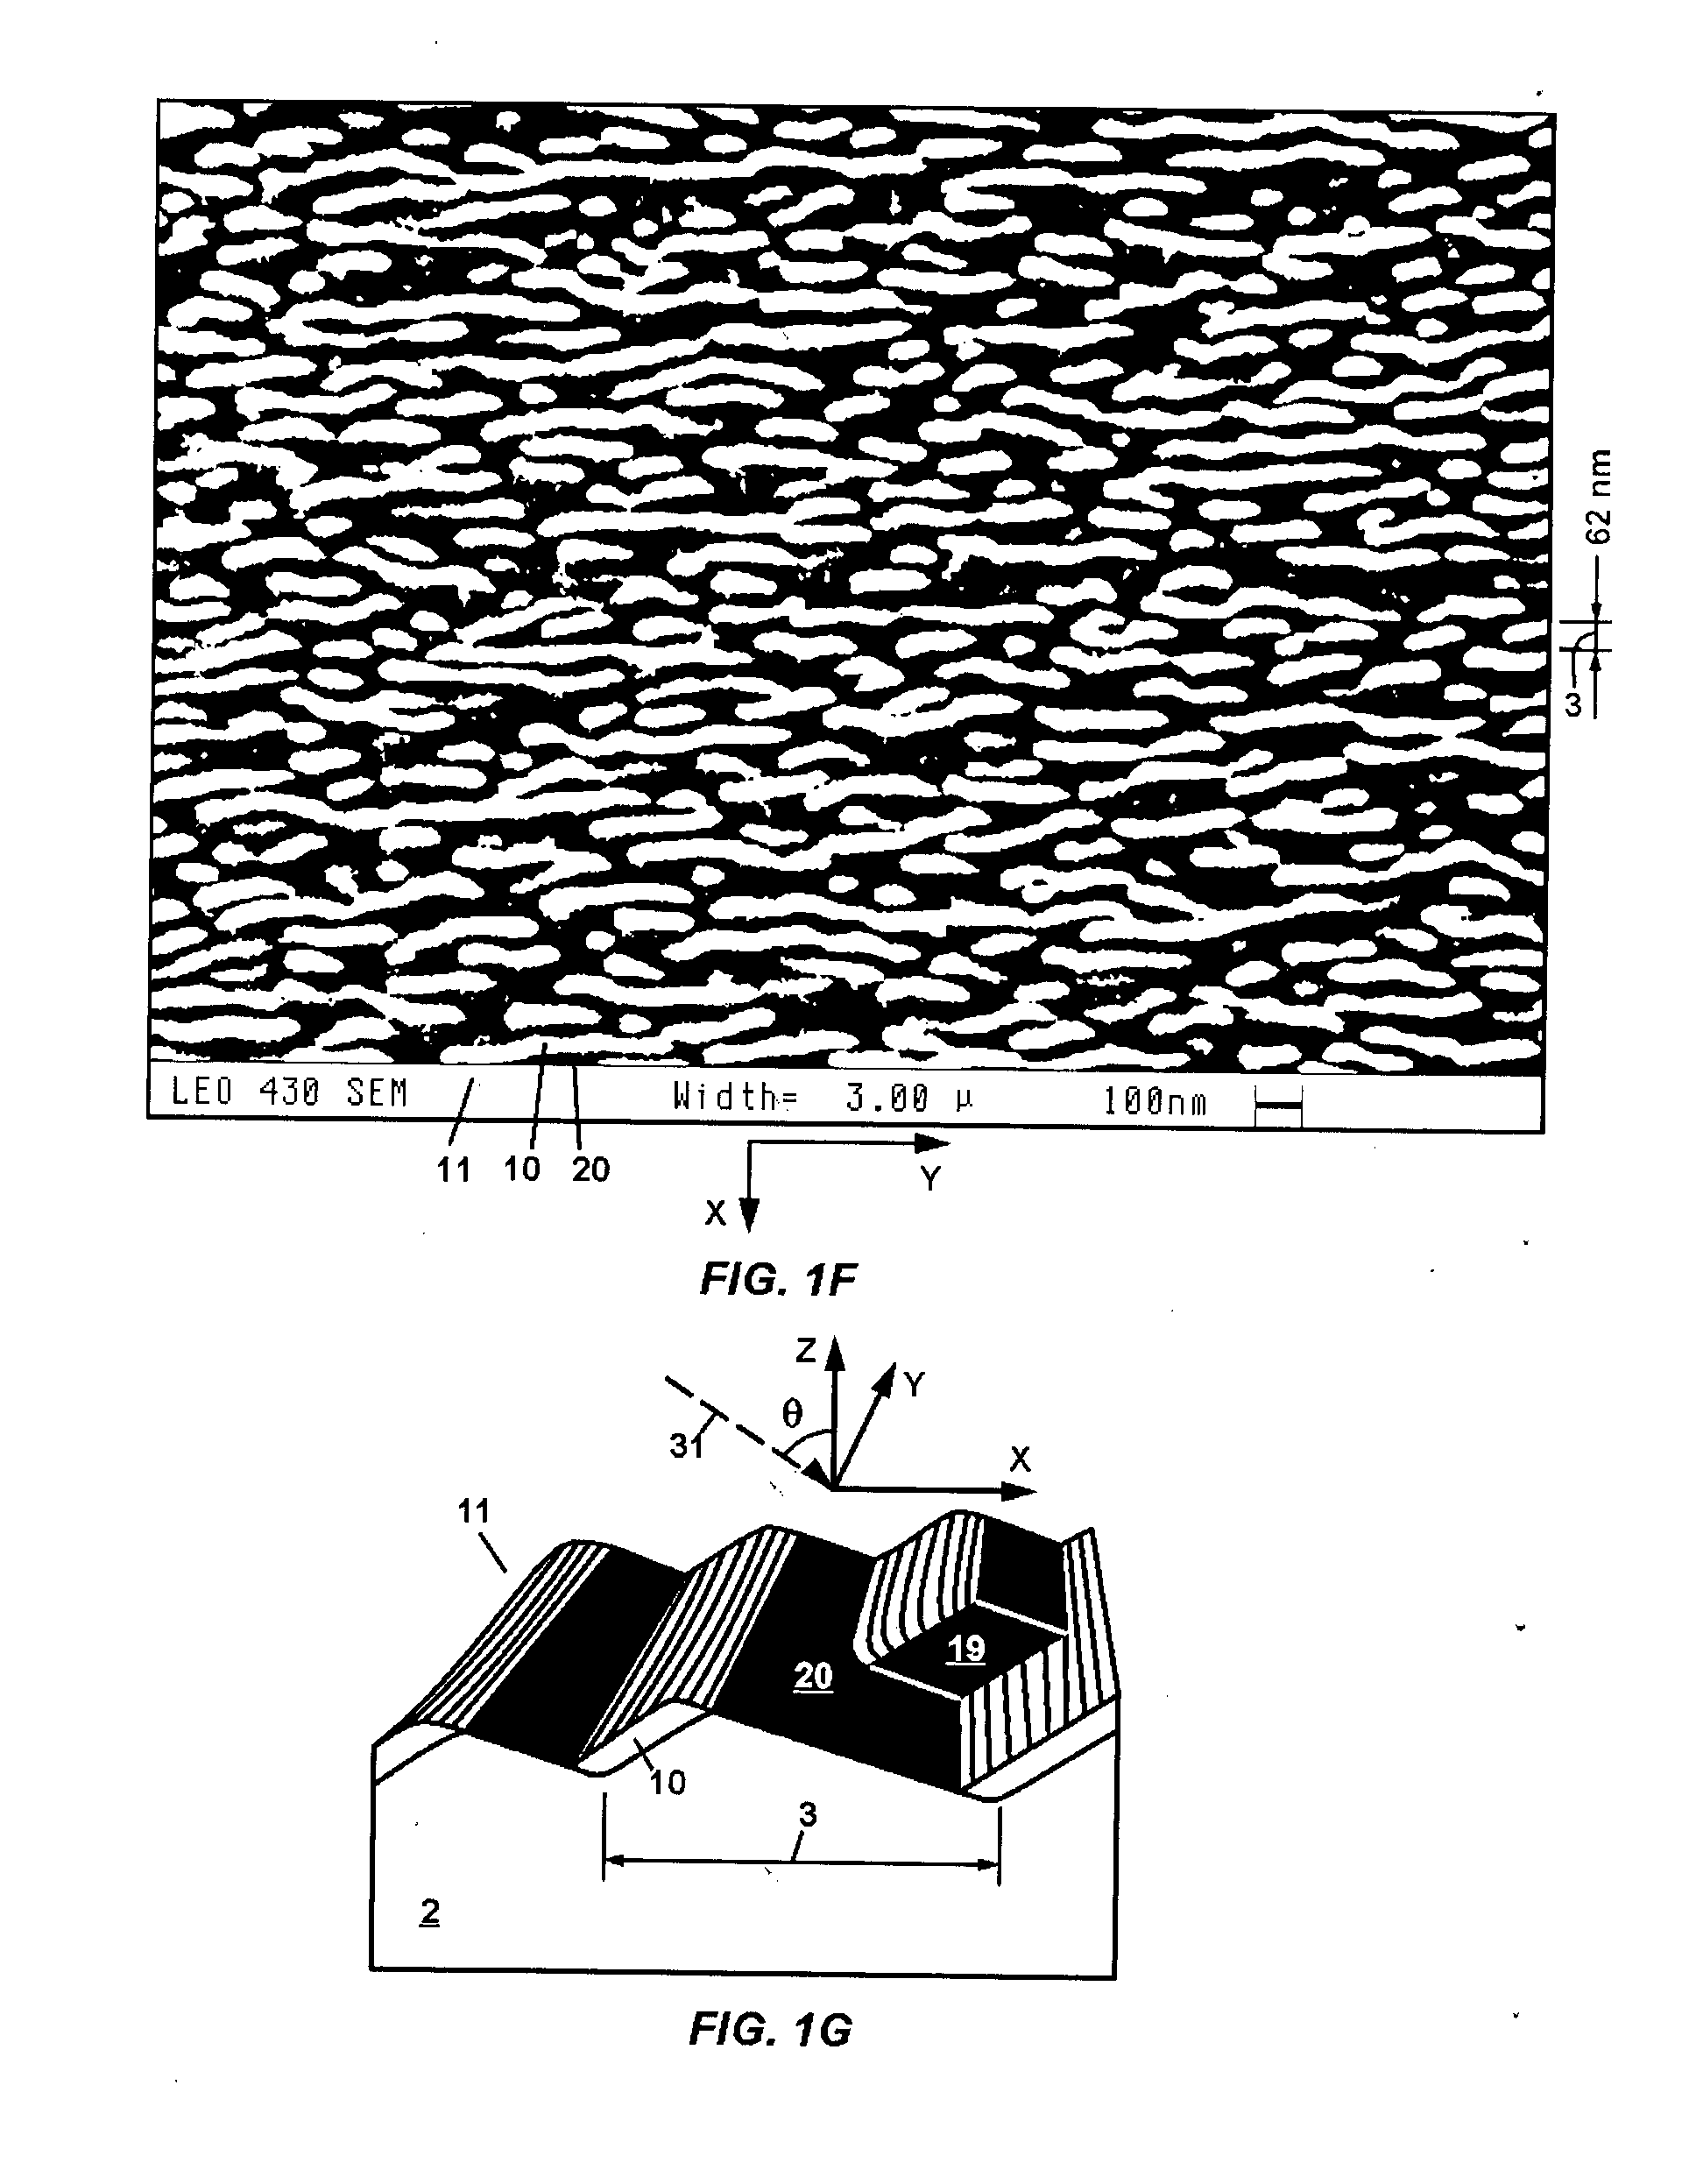 Sers-sensor with nanostructured surface and methods of making and using